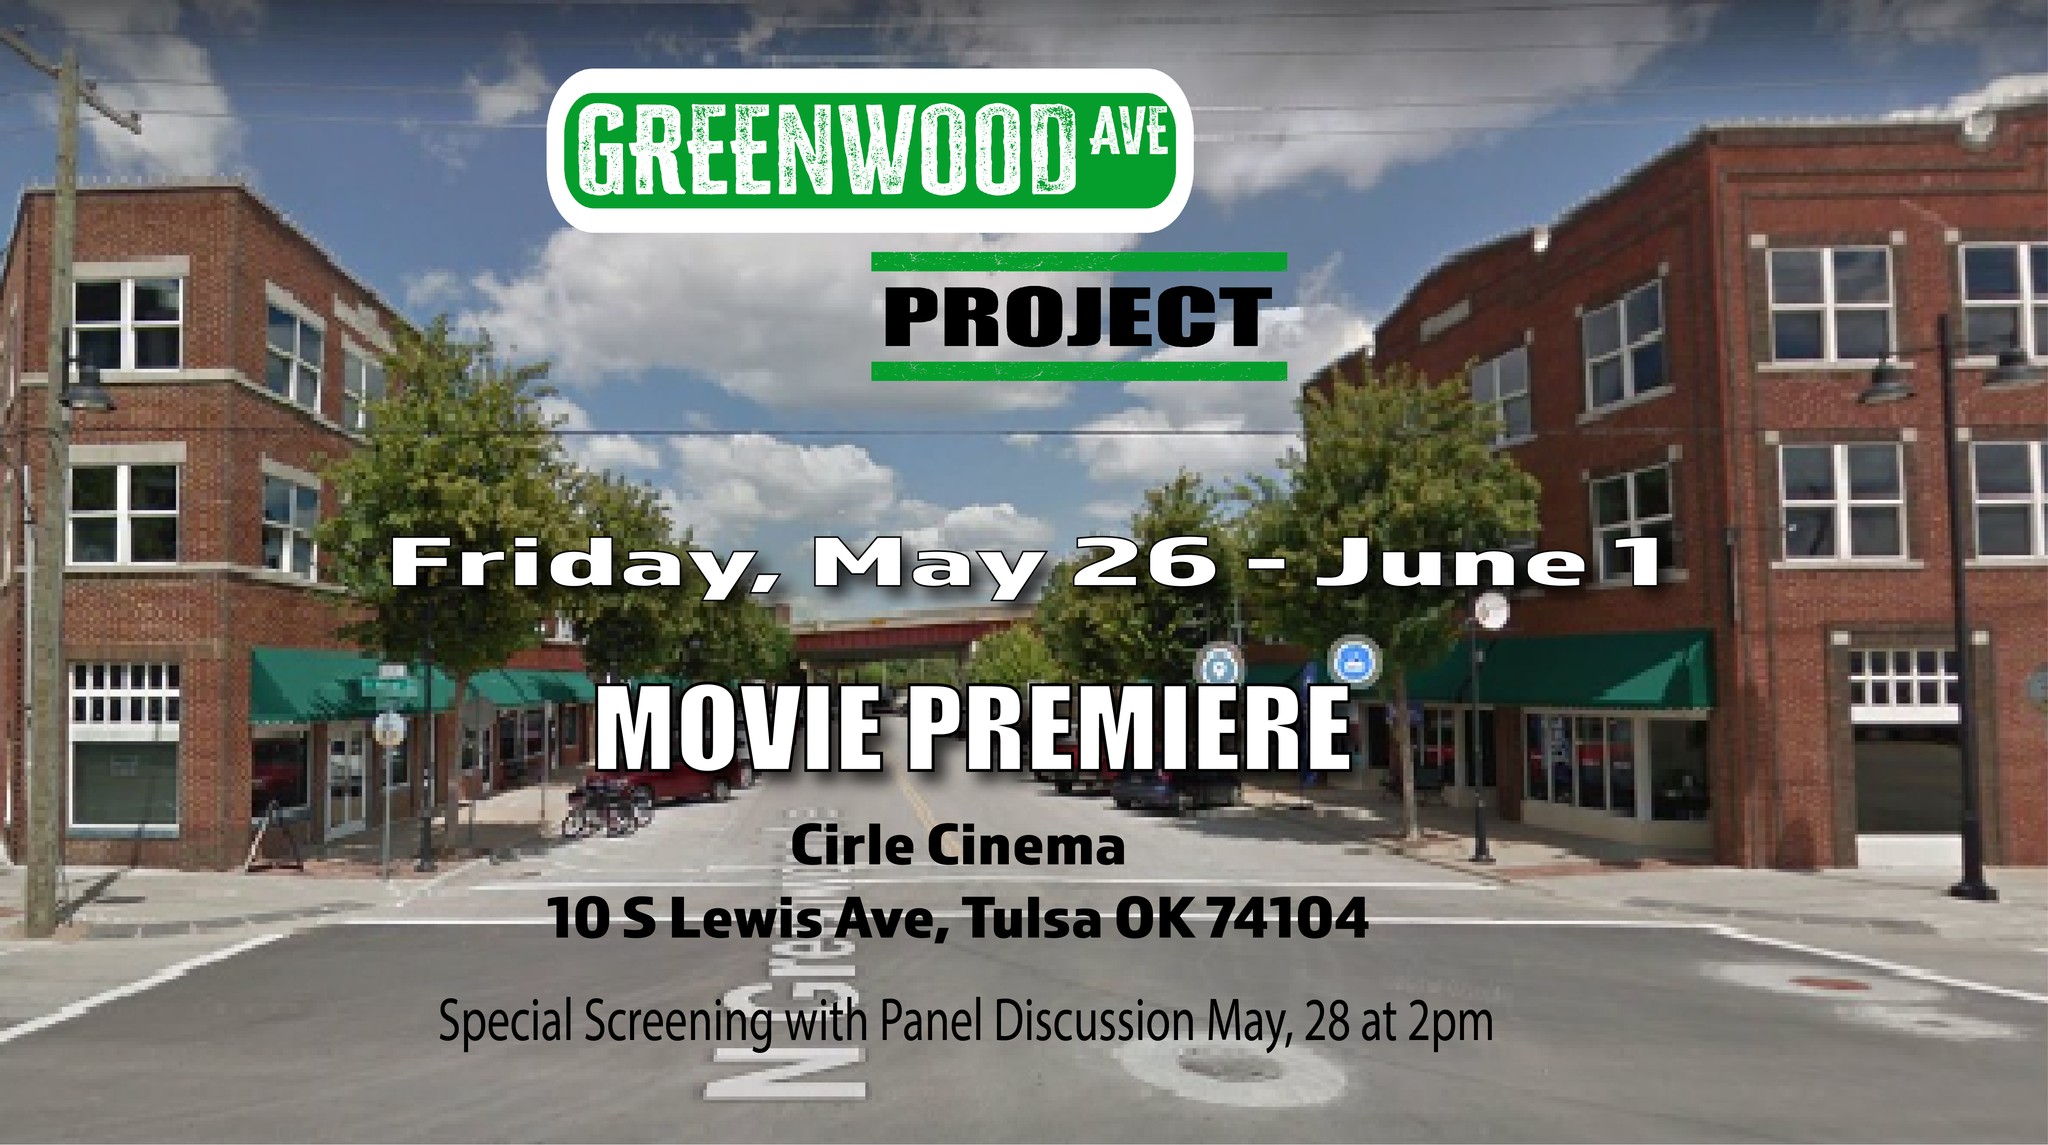 World Premiere Tour Presenting Documentary “Greenwood Ave Project” May 26th – June 1st Cirlcle Cinema Theatre